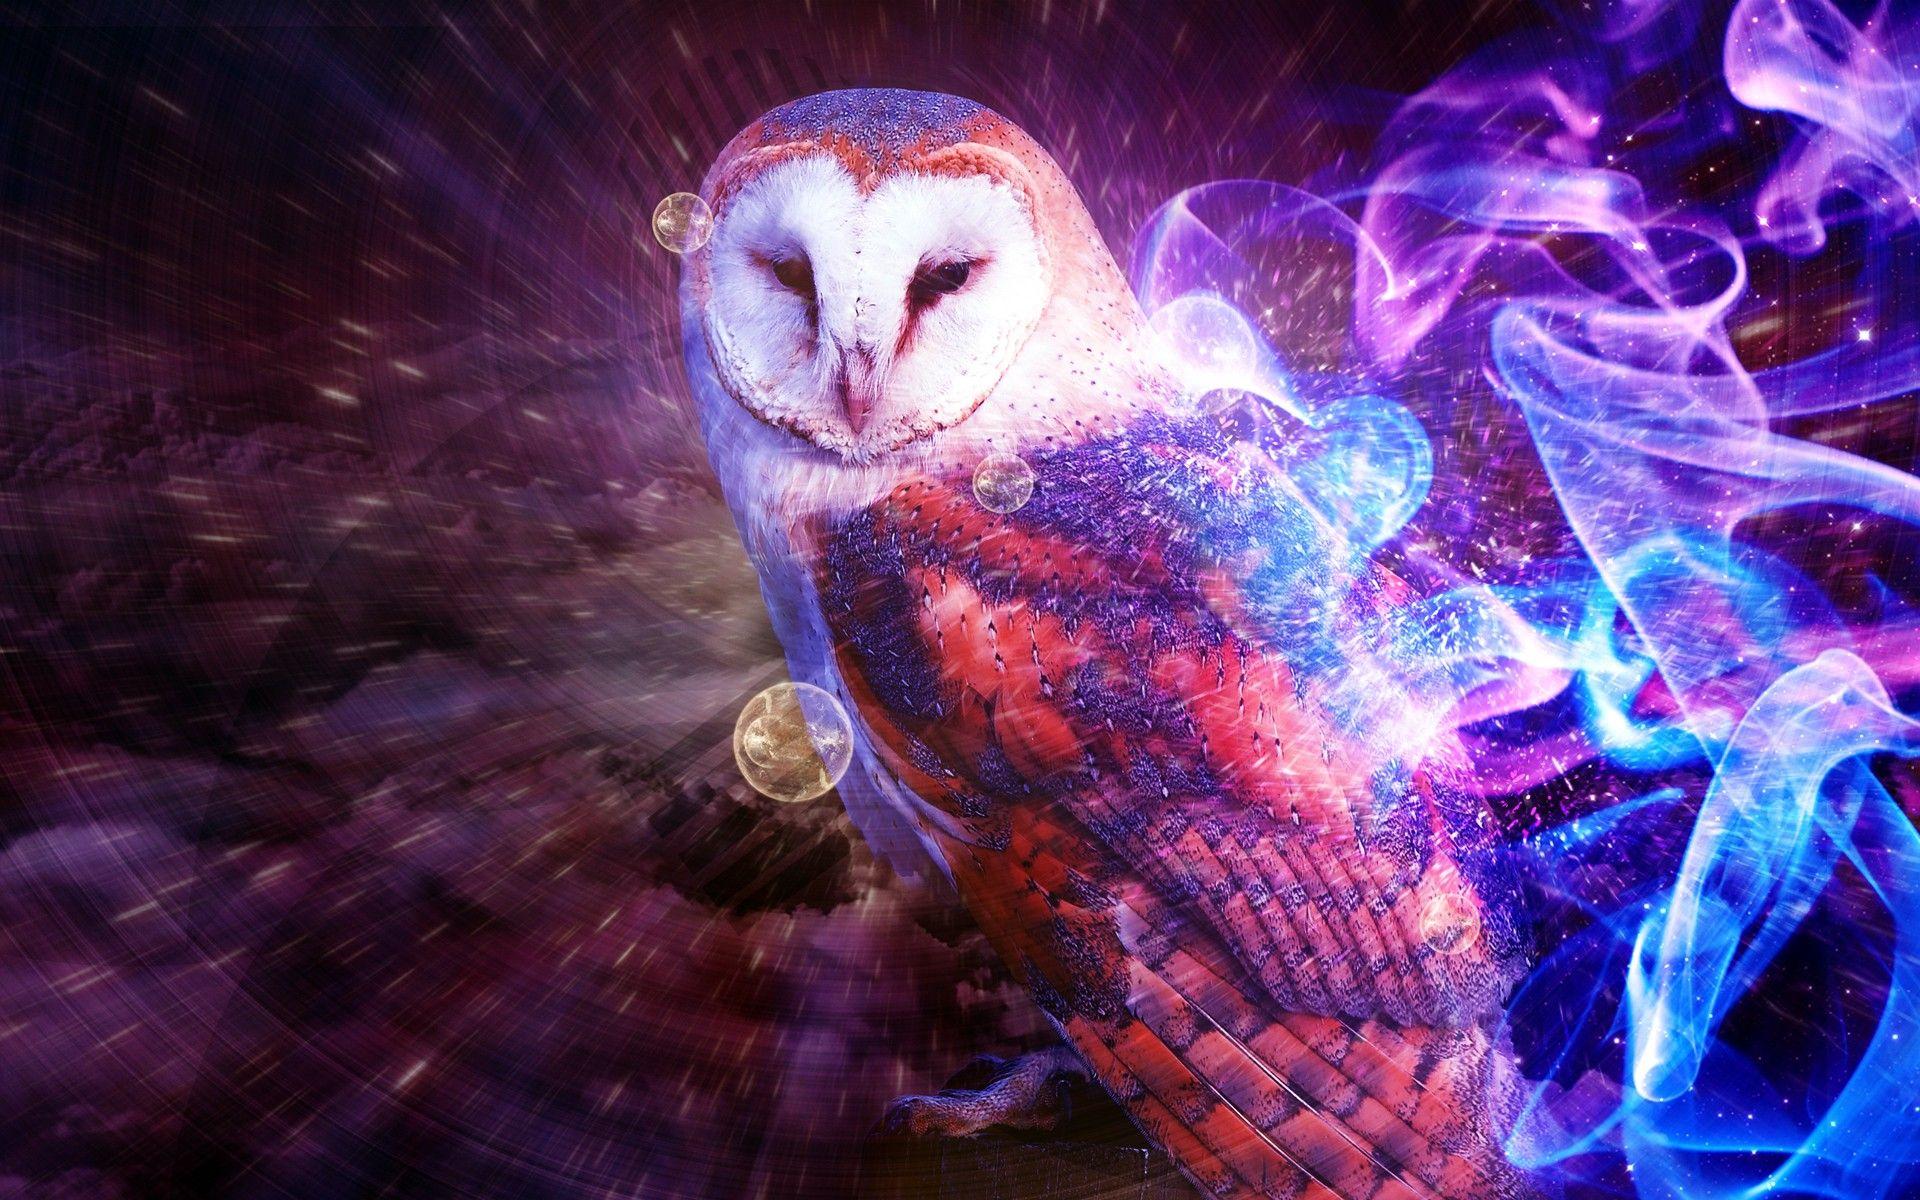 Guardians of Ga'Hoole image owl HD wallpaper and background photo